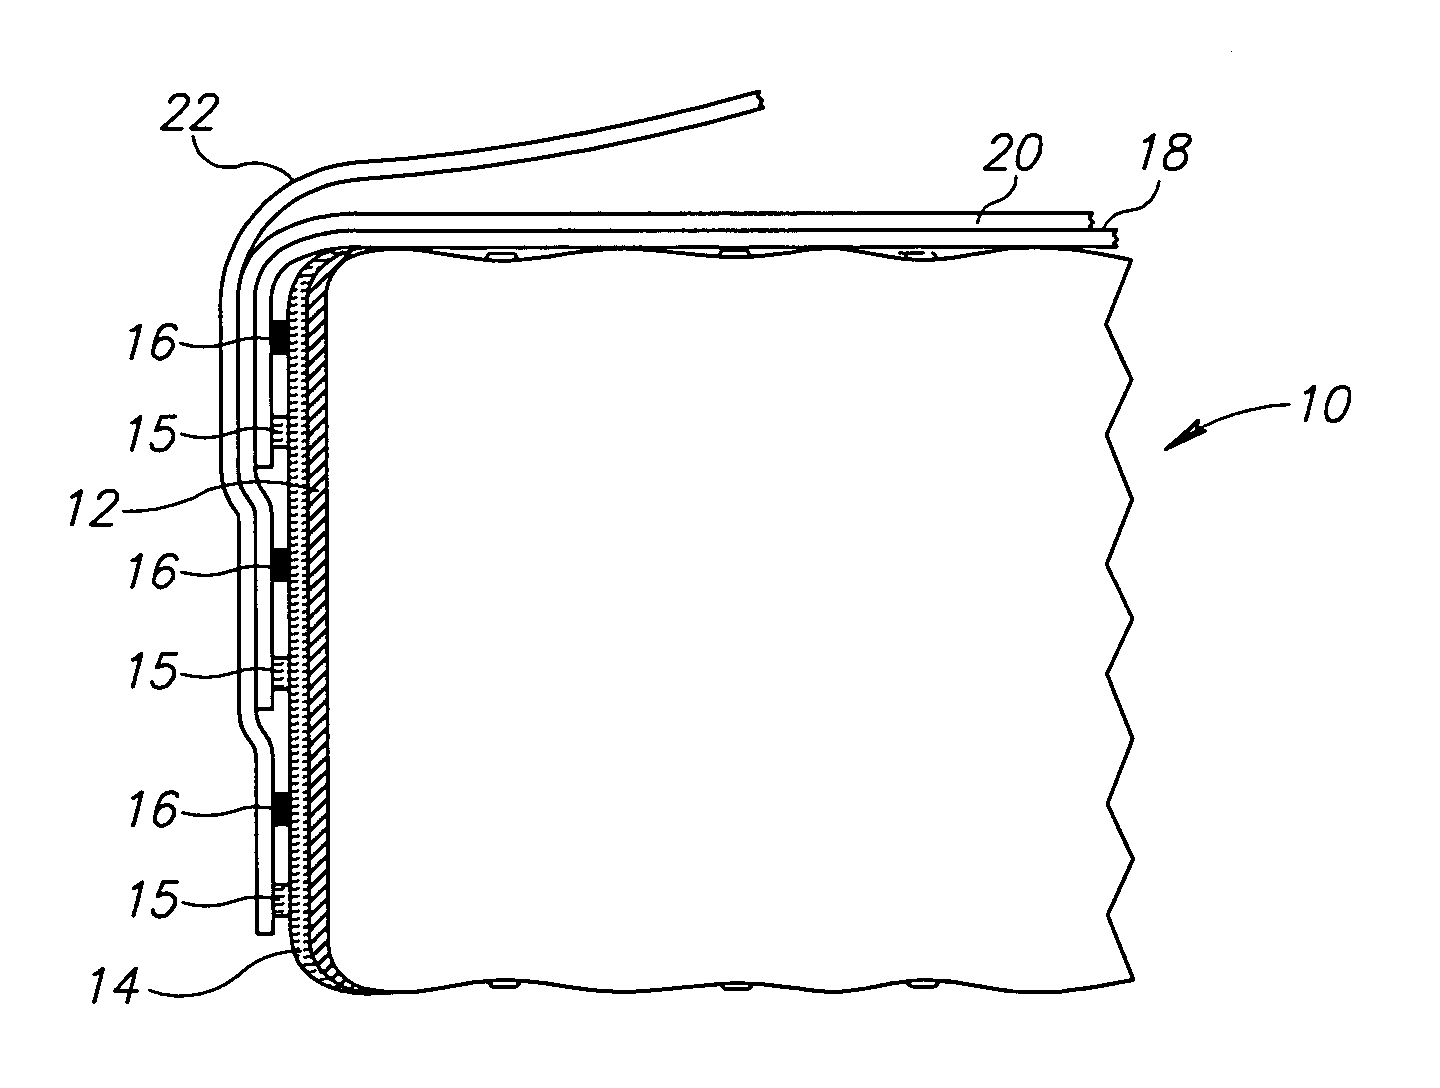 Method for fitting bedding to a mattress